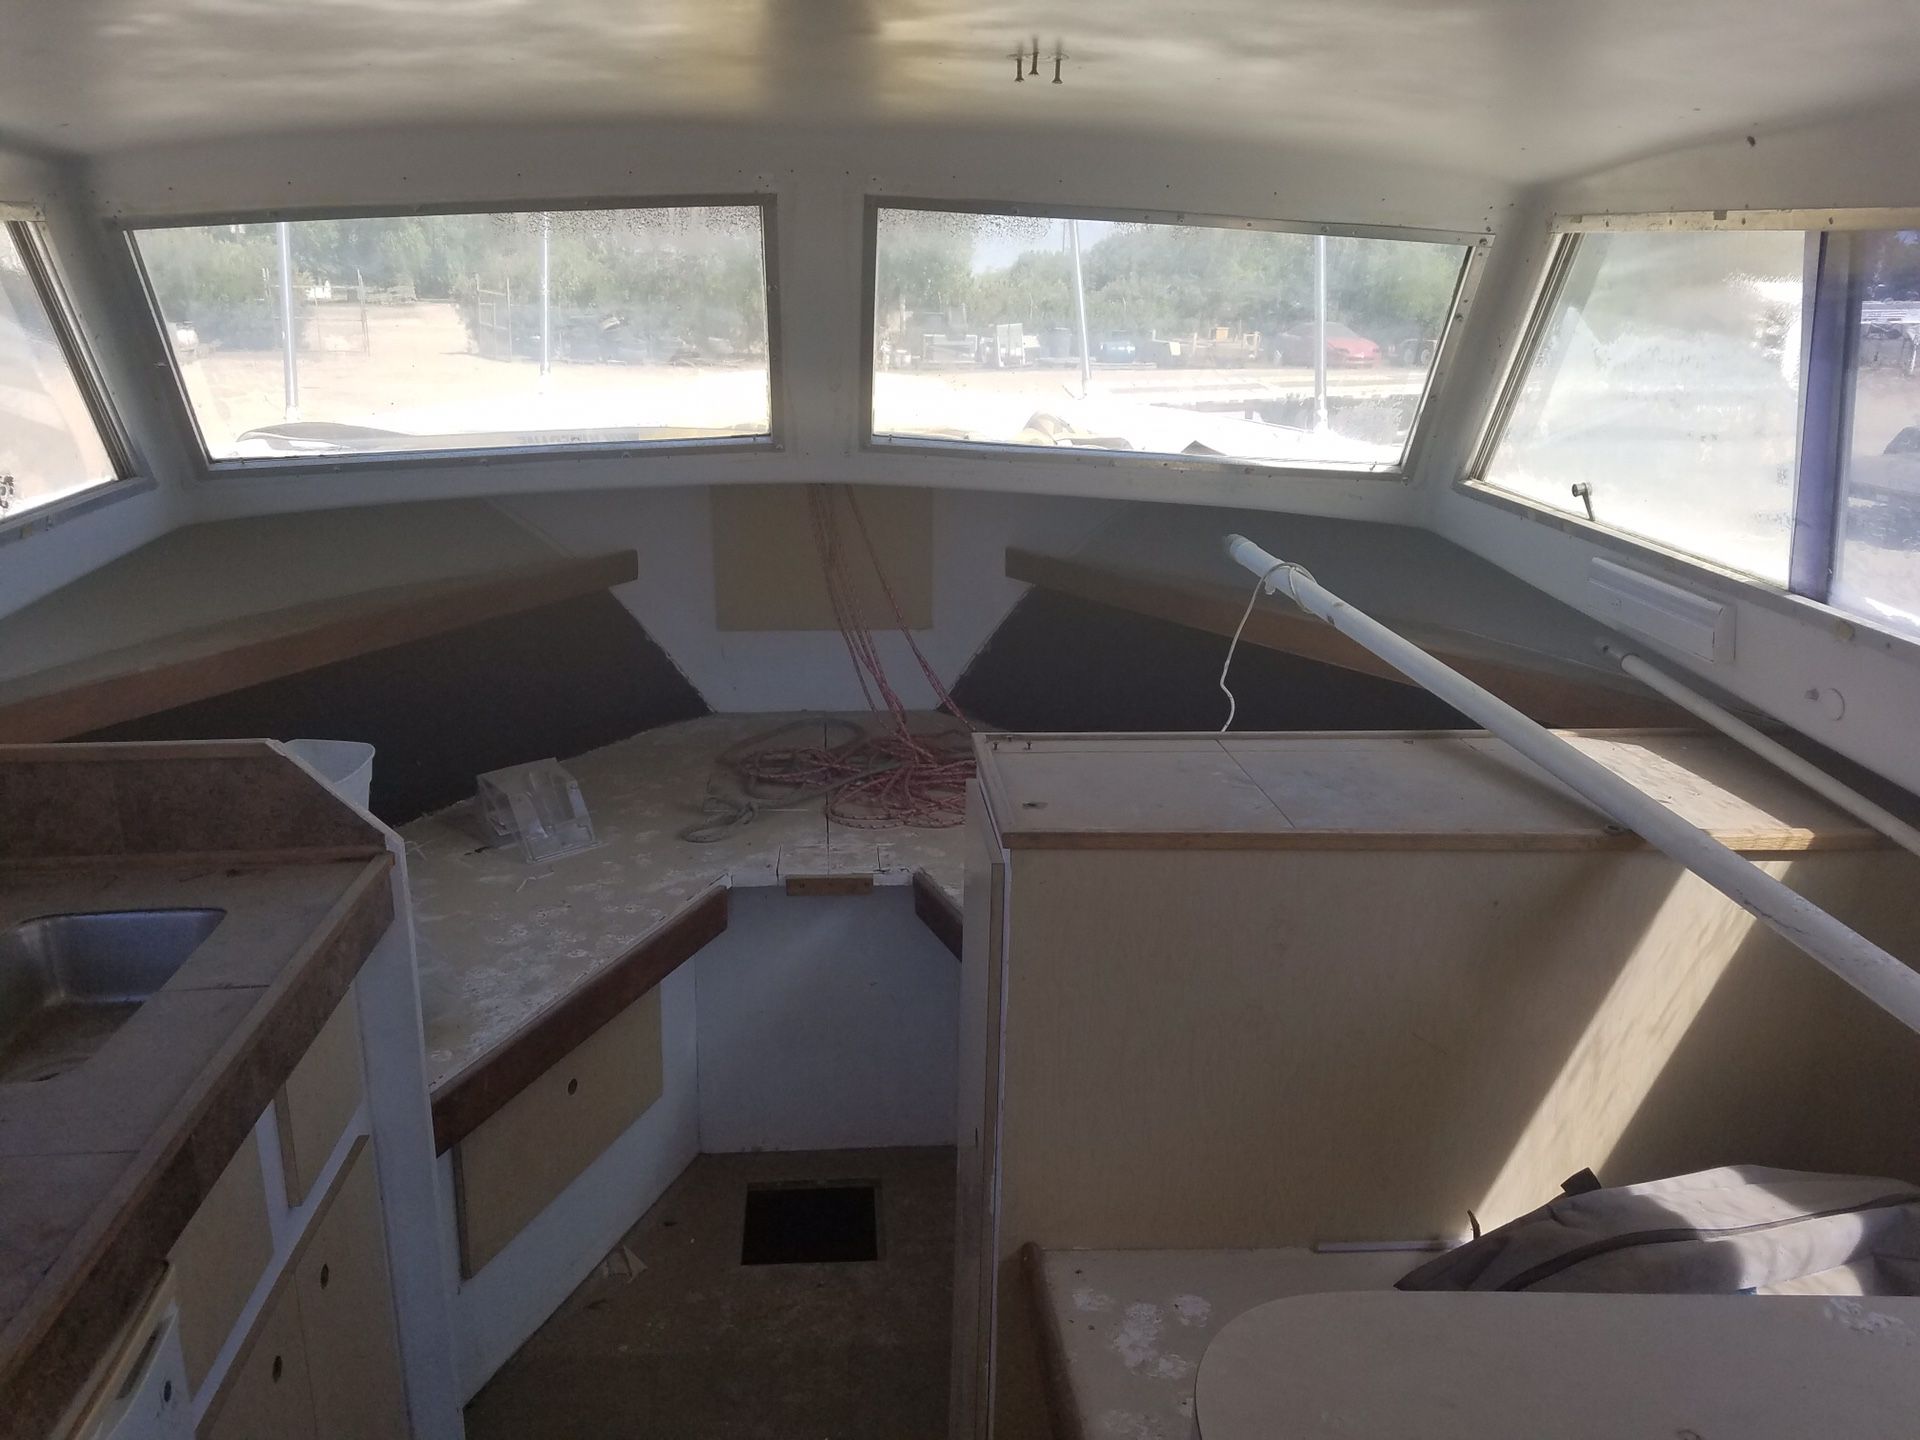 Photo 30 ft Pearson Yatch interior in great shape has paperwork